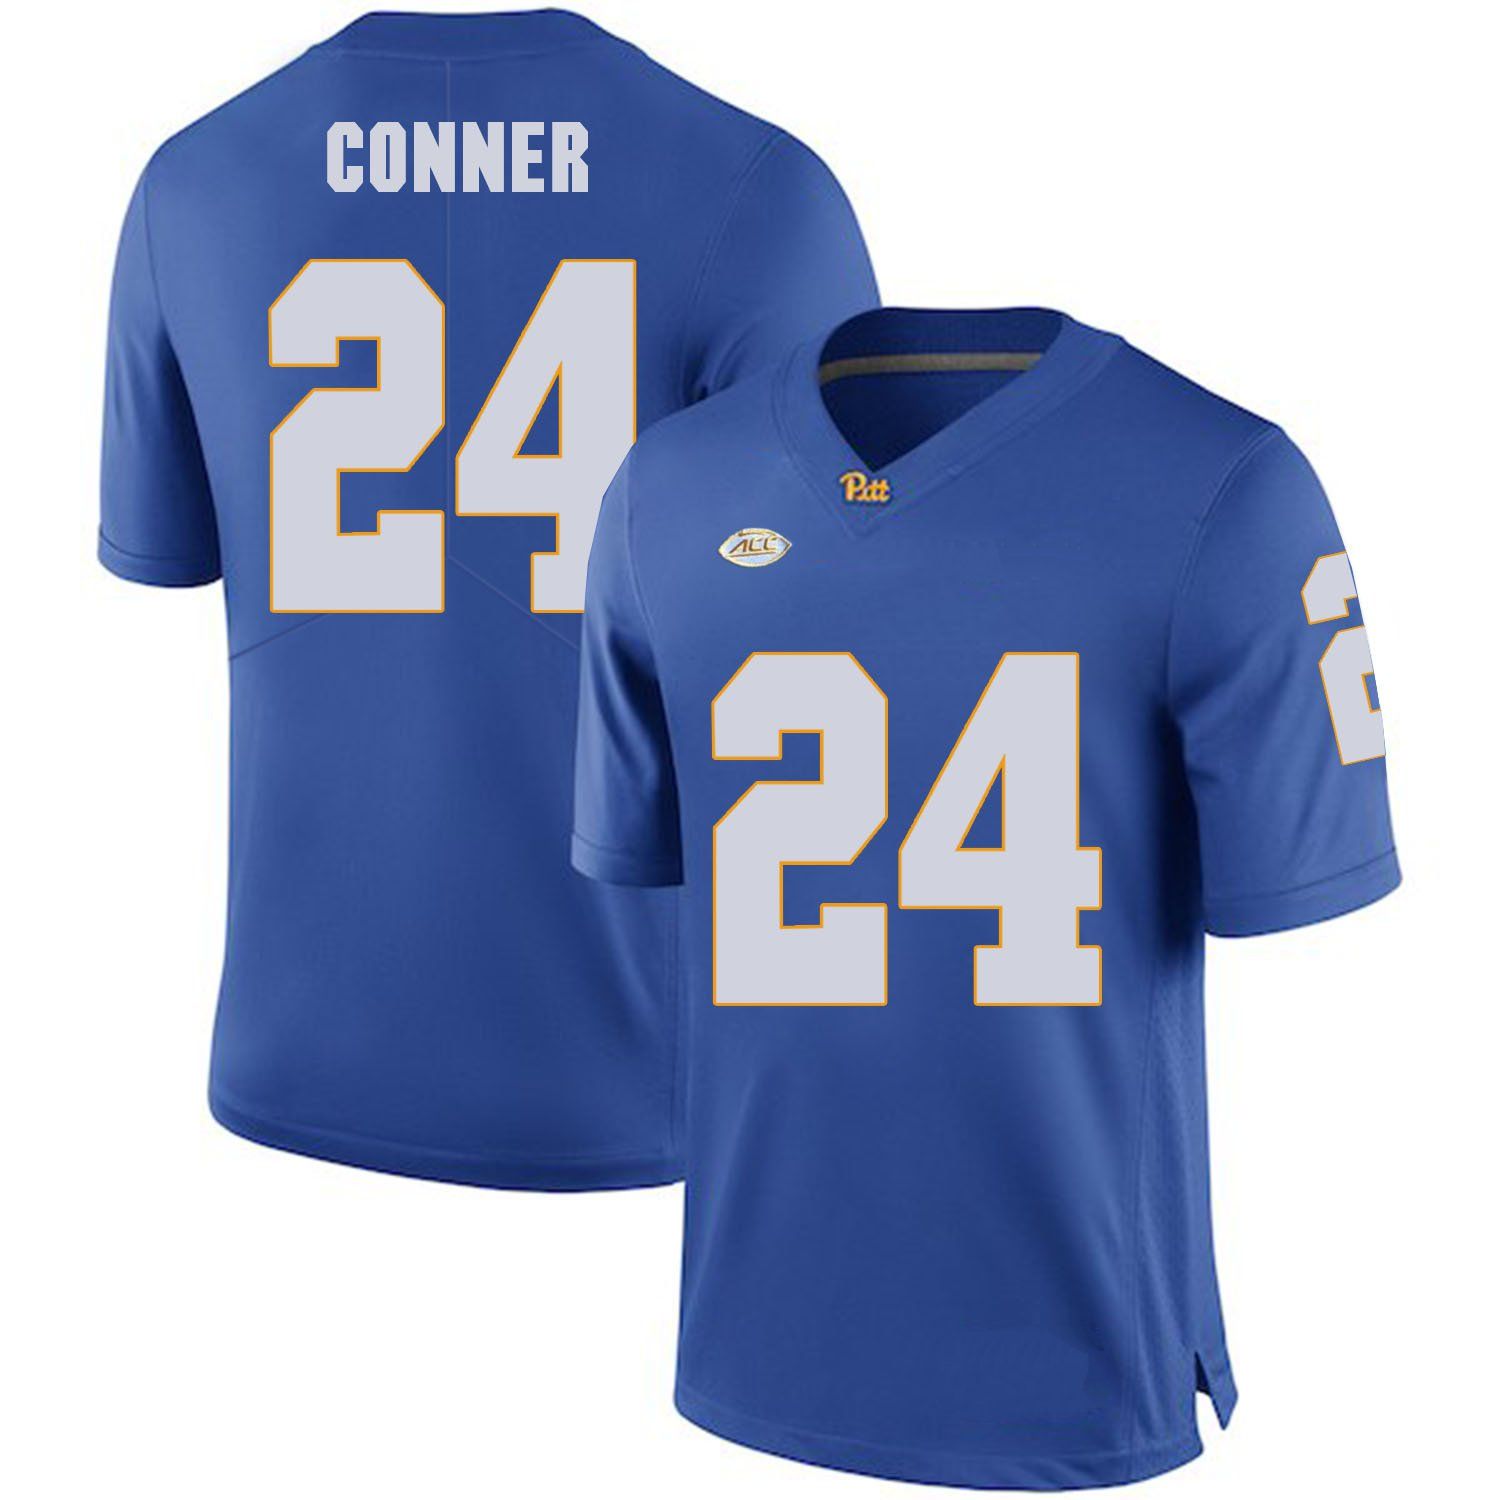 james conner stitched jersey